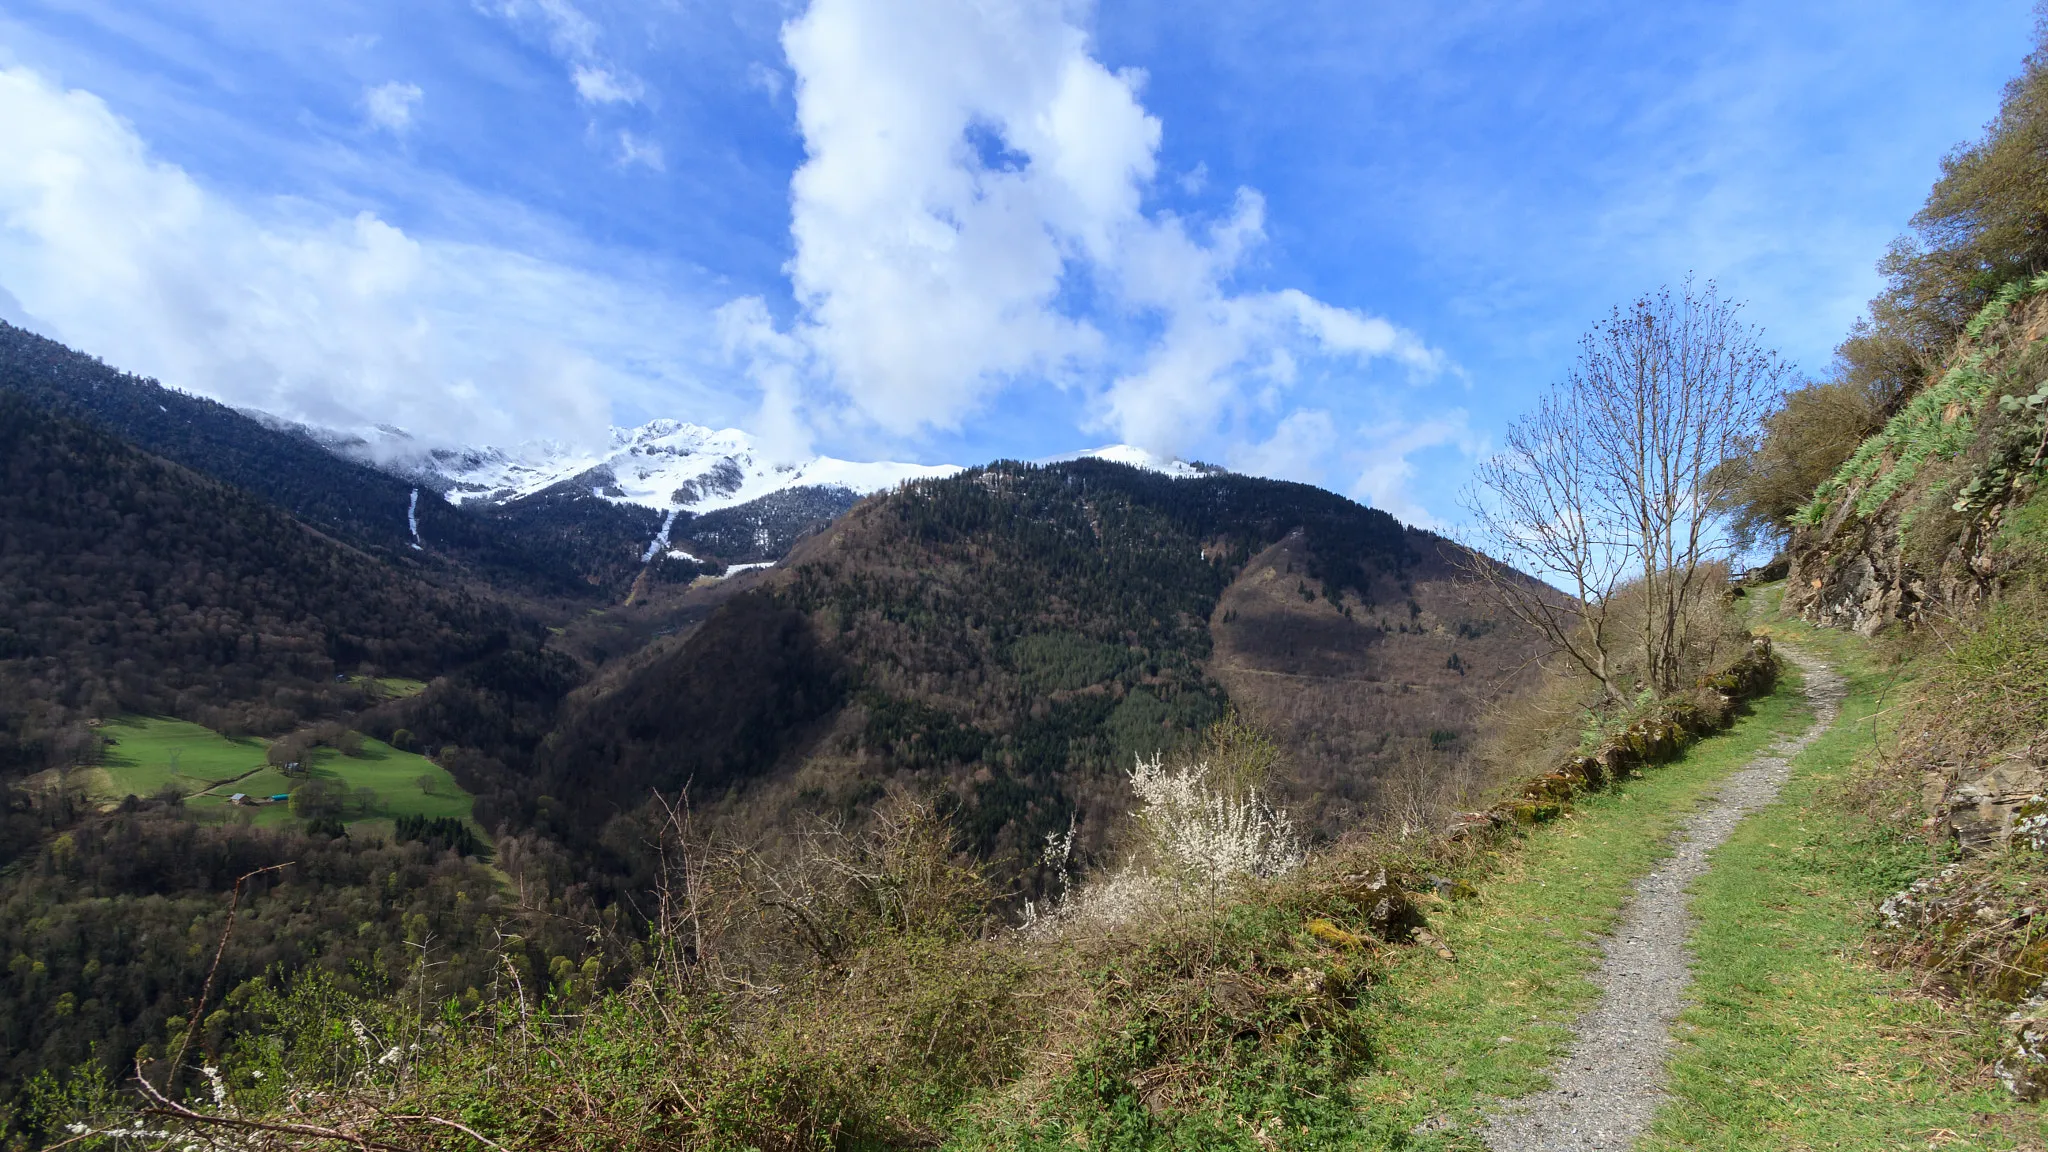 Photo showing: 500px provided description: After a nice little hike from Bagn?re de Luchon Luchon, we arrive to Cazaril with this little path on the right and the valley on our left. [#Snow ,#France ,#Blue ,#Sky ,#Mountain ,#Clouds ,#Grass ,#Scenery ,#Path]